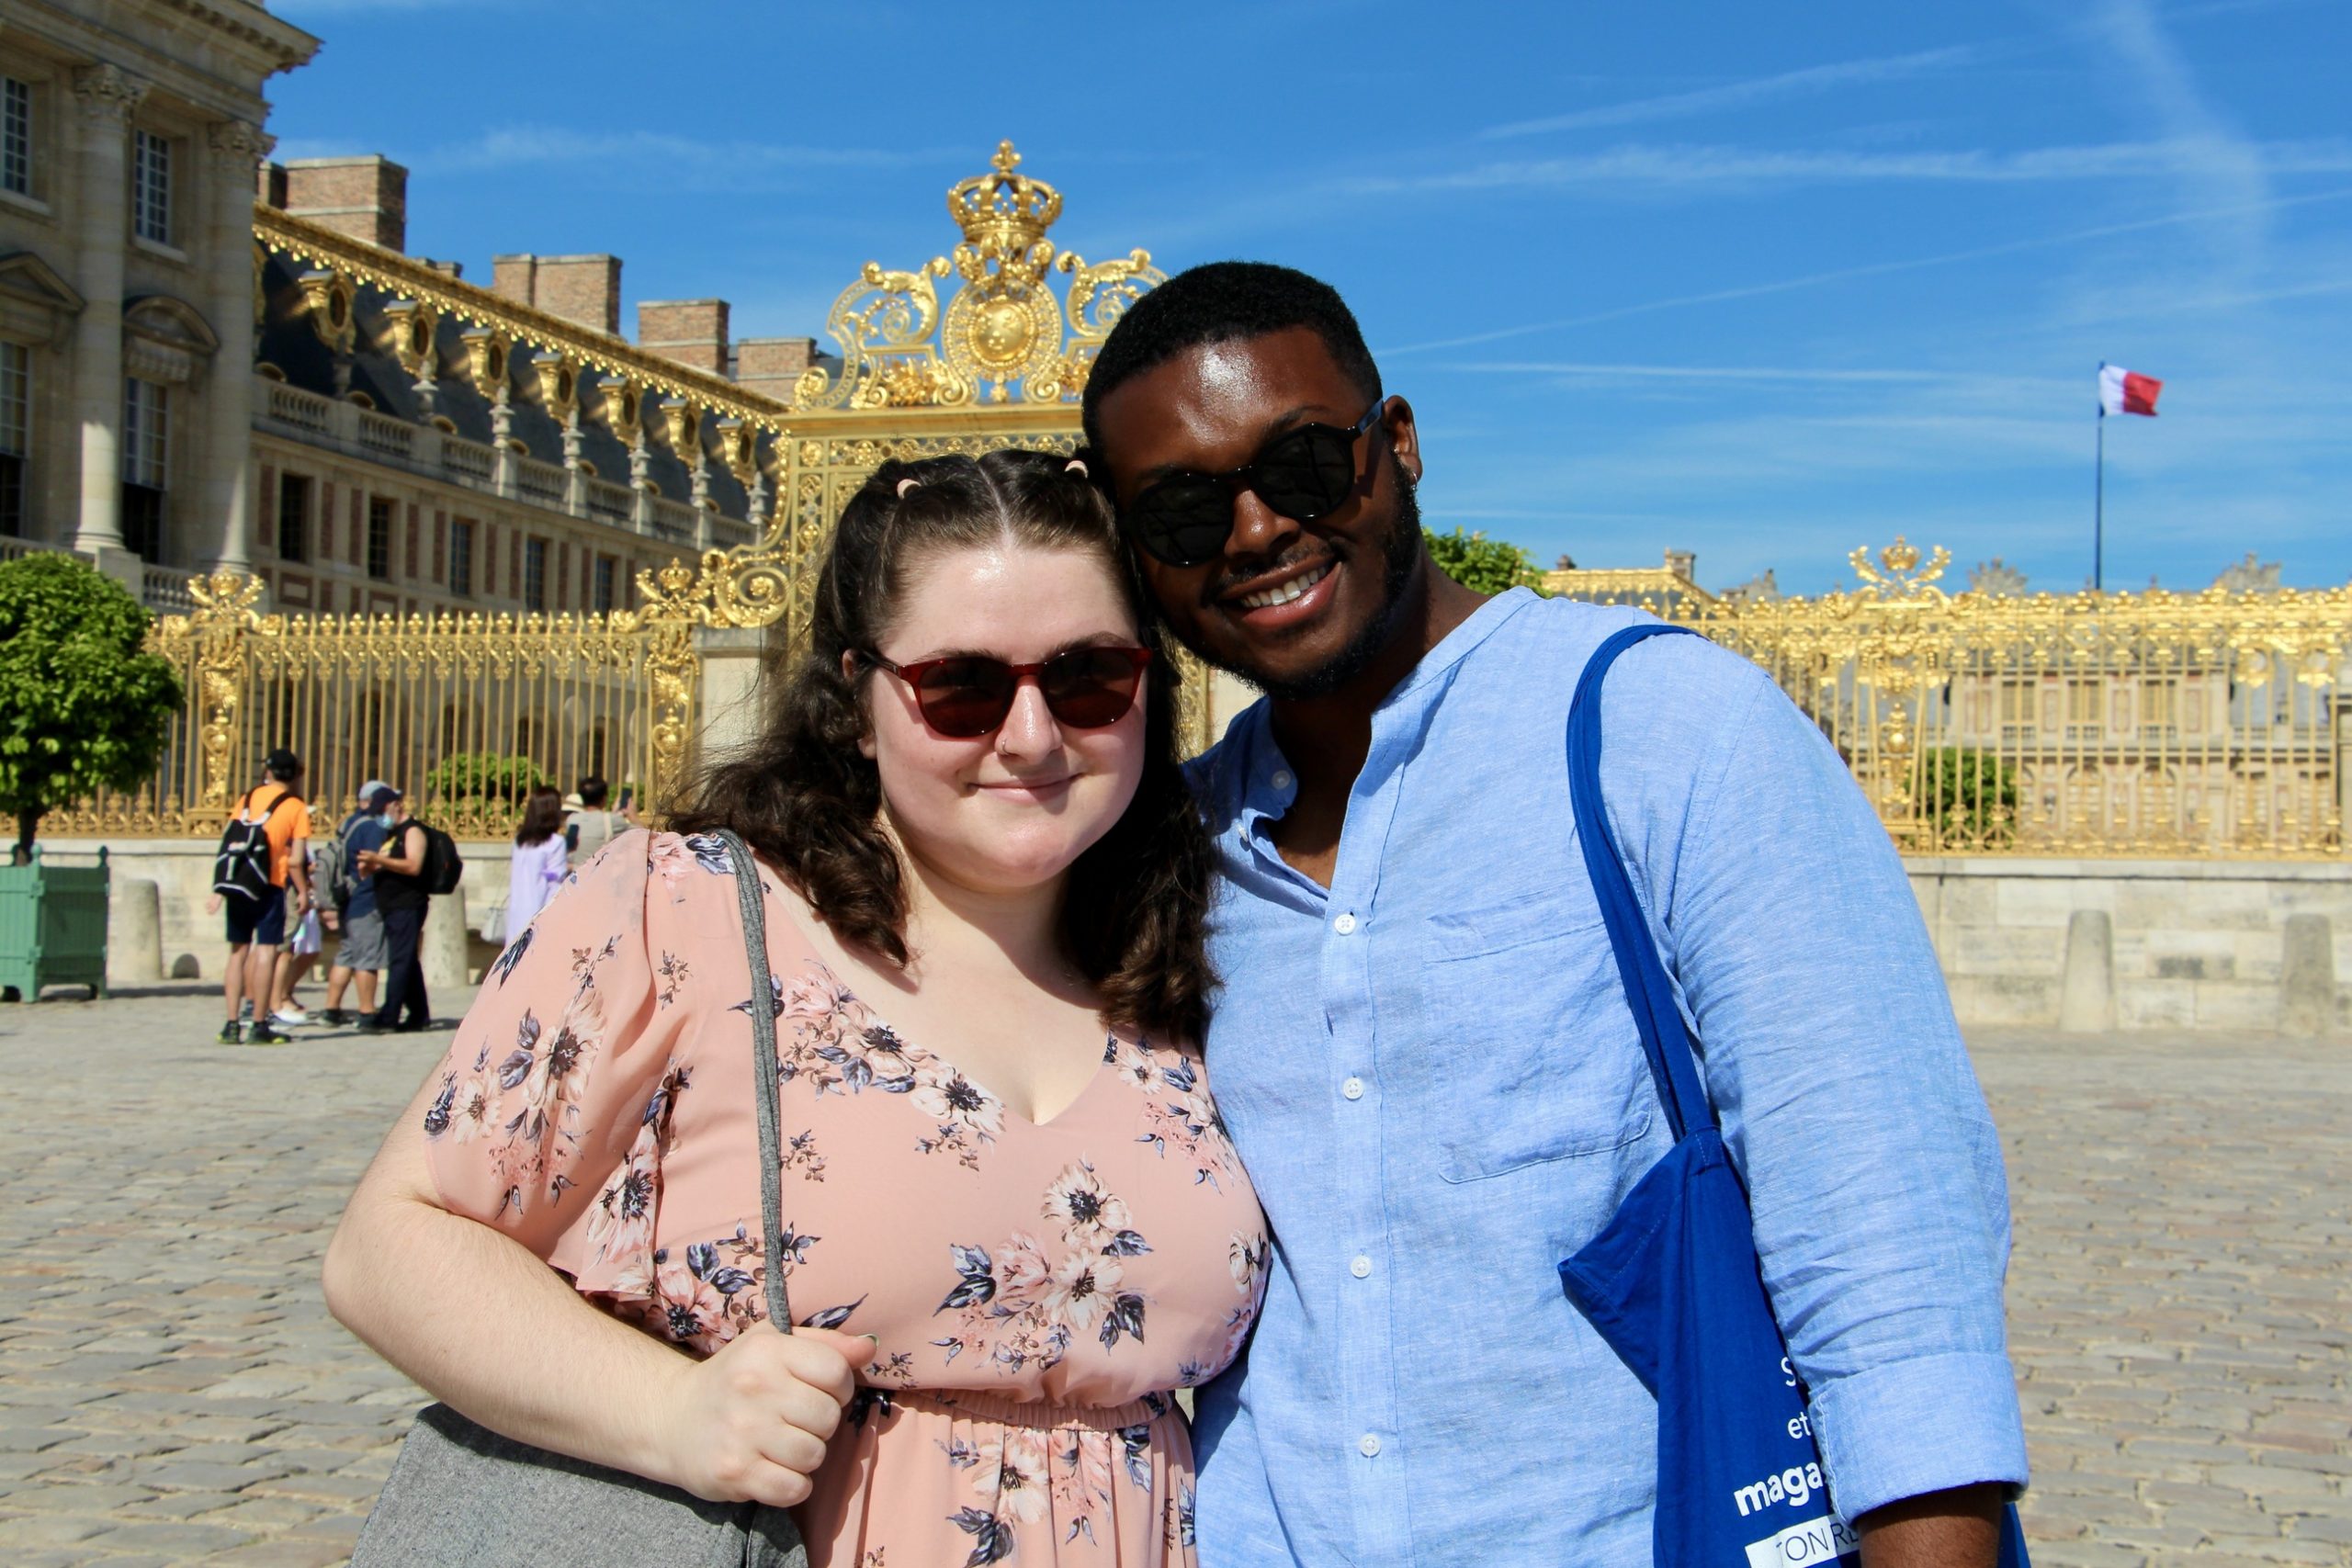 Jalen and Maria smile at the entrance gate of the Palace of Versailles.